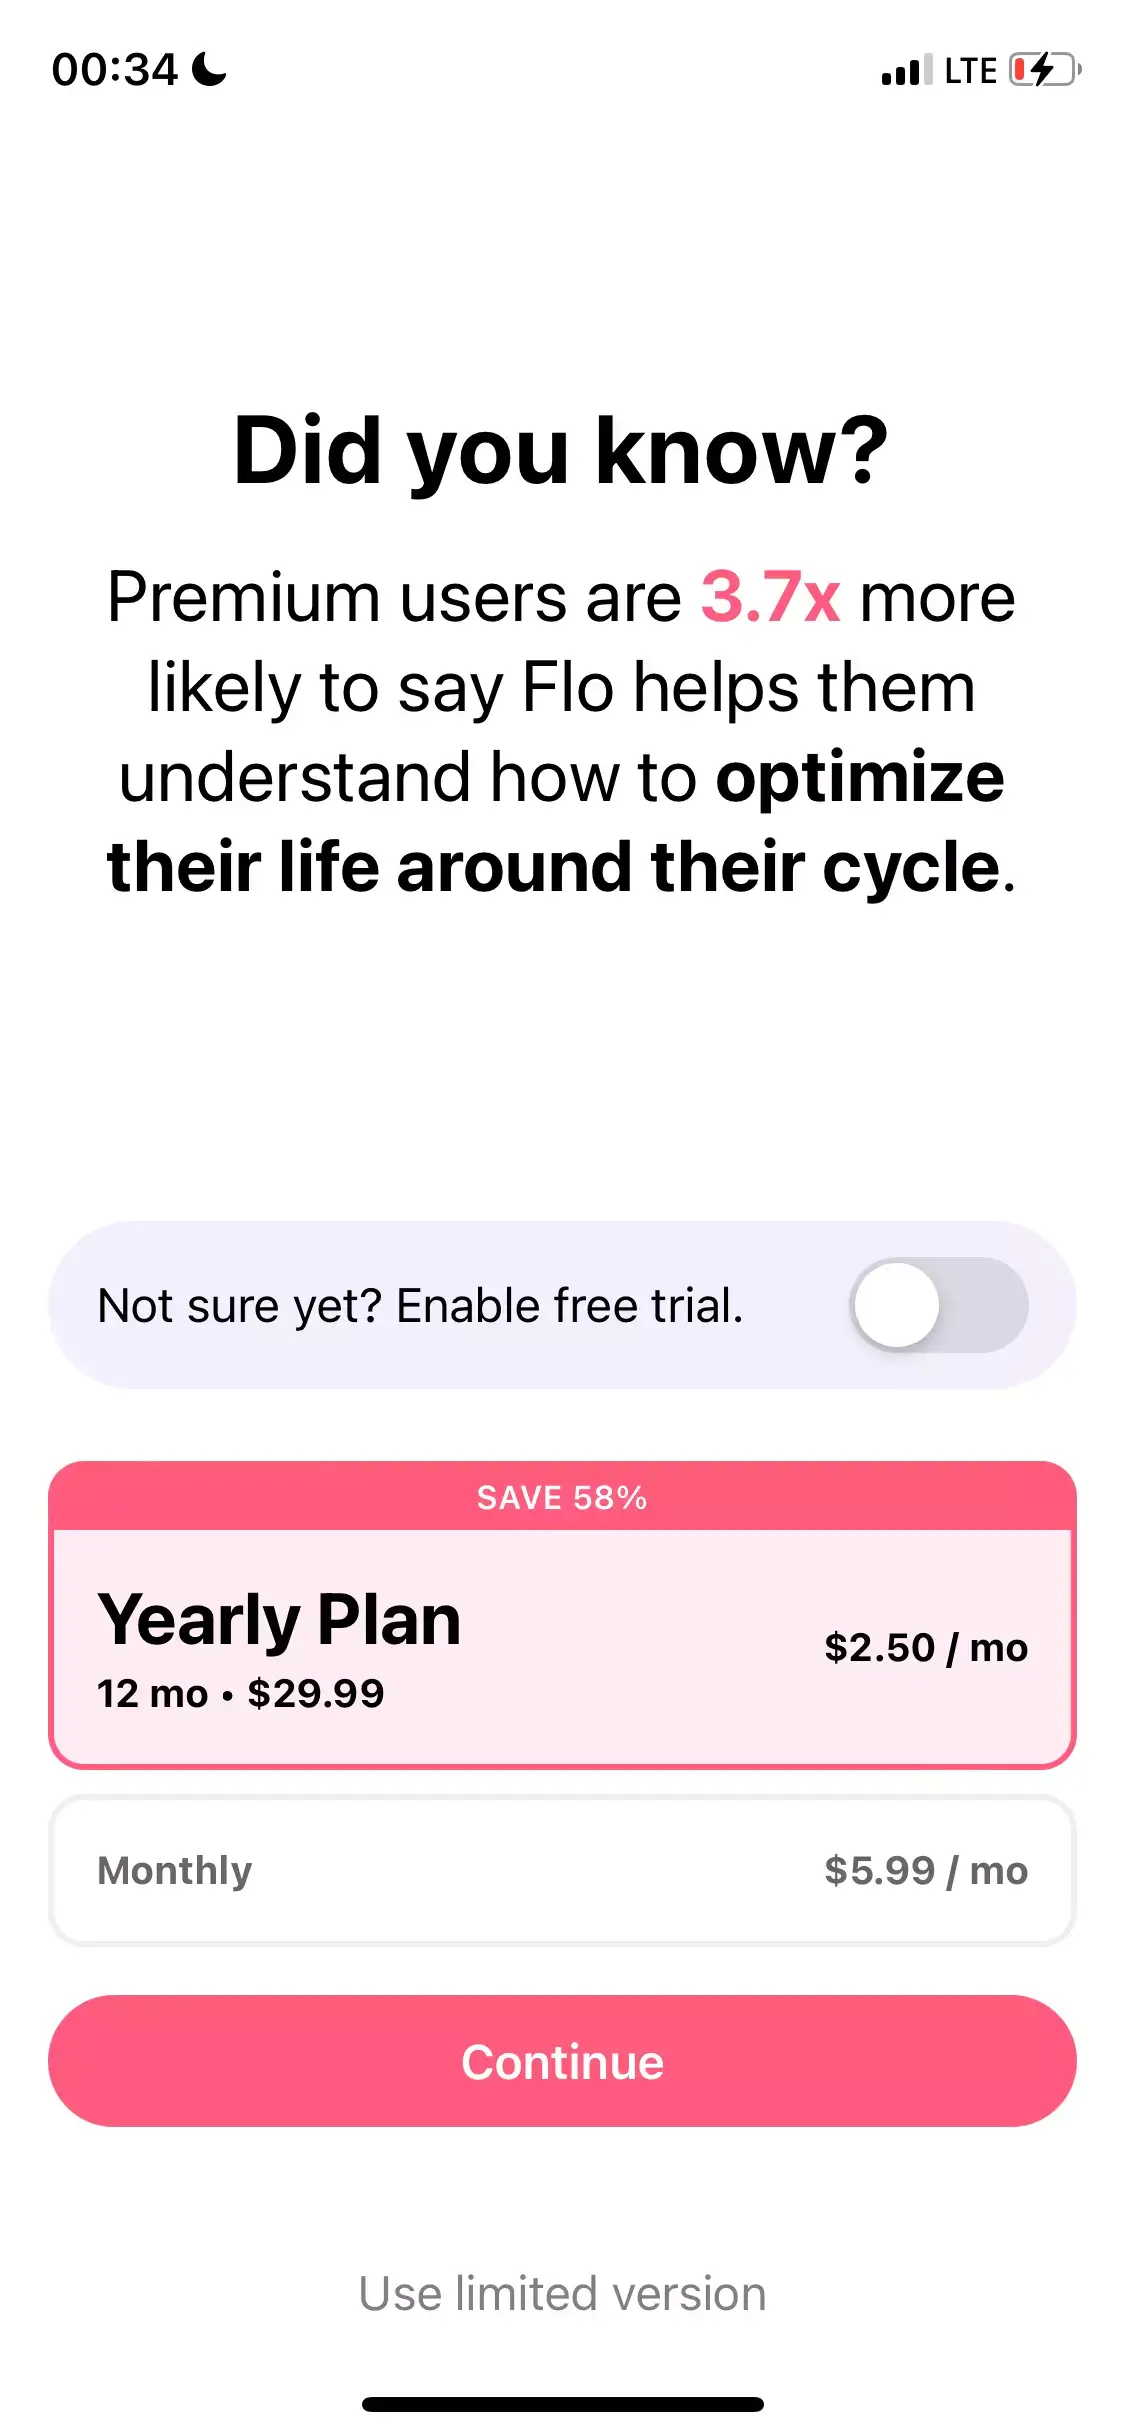 mobile paywall example by Flo